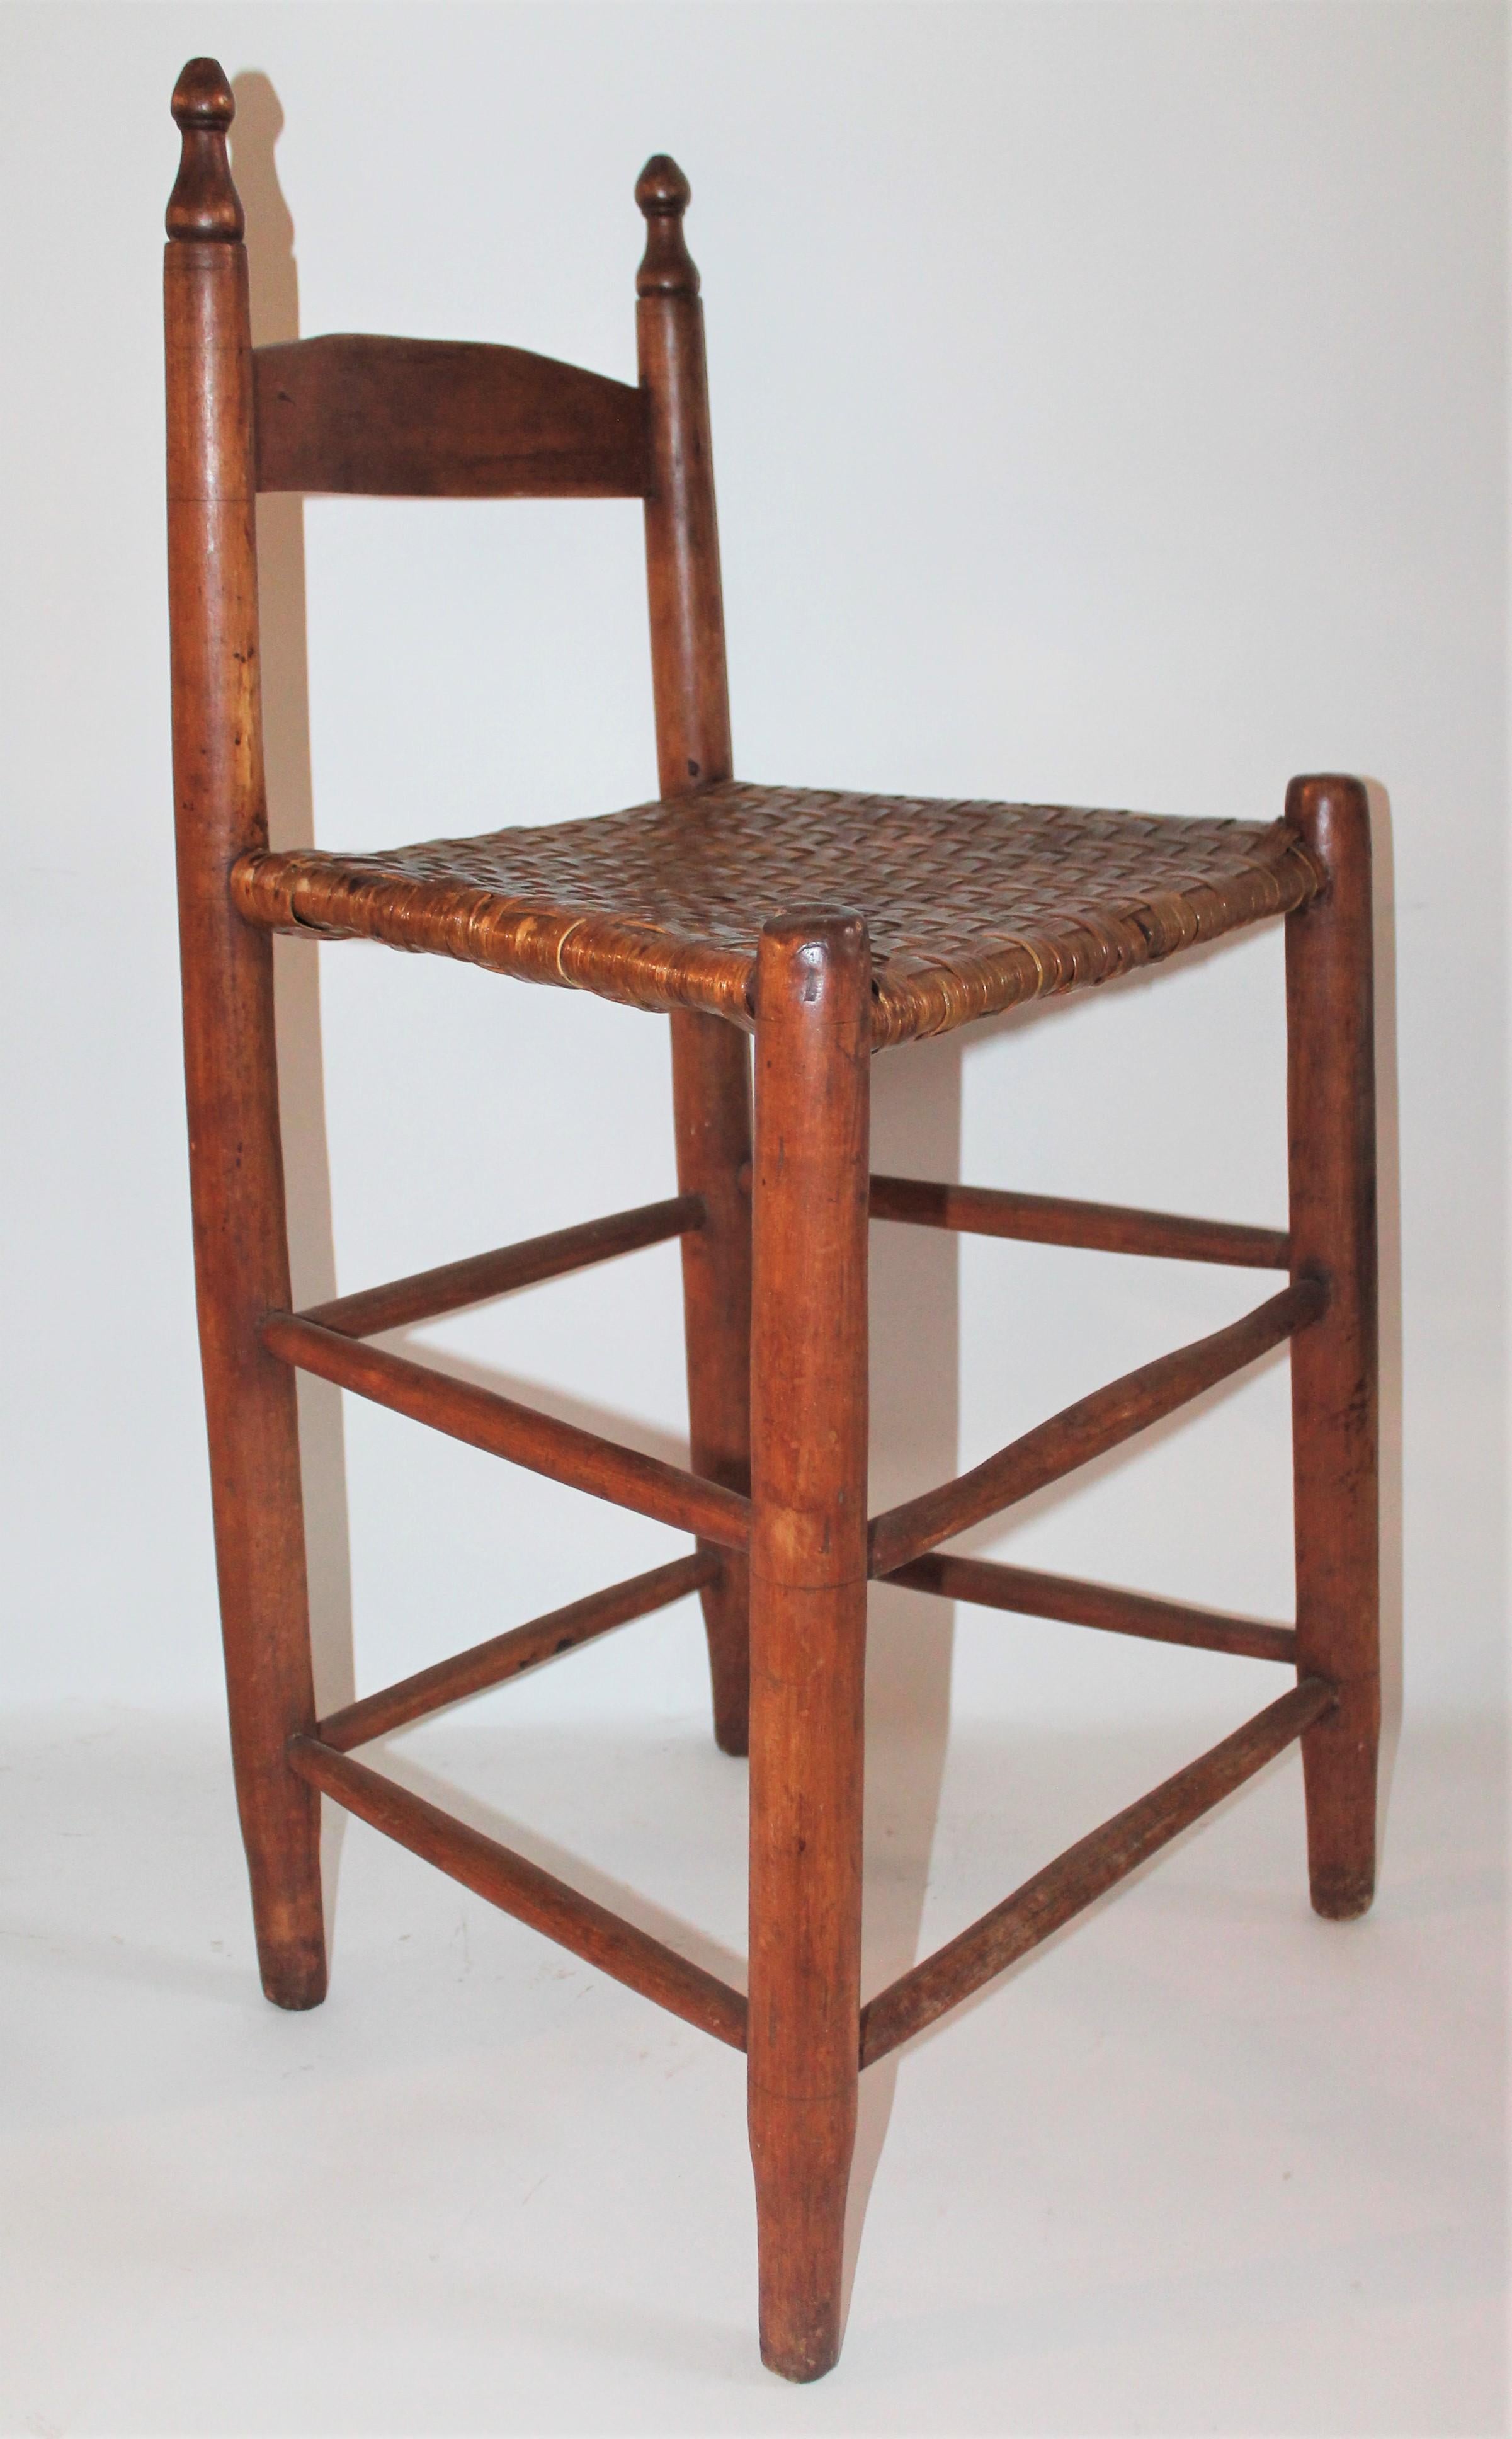 This fine simple high seat chair is in good condition and super comfortable the natural wood has a very nice aged patina. The edge of the side of the seat has minor splints in the original handwoven splint seat. This chair is very sturdy though.